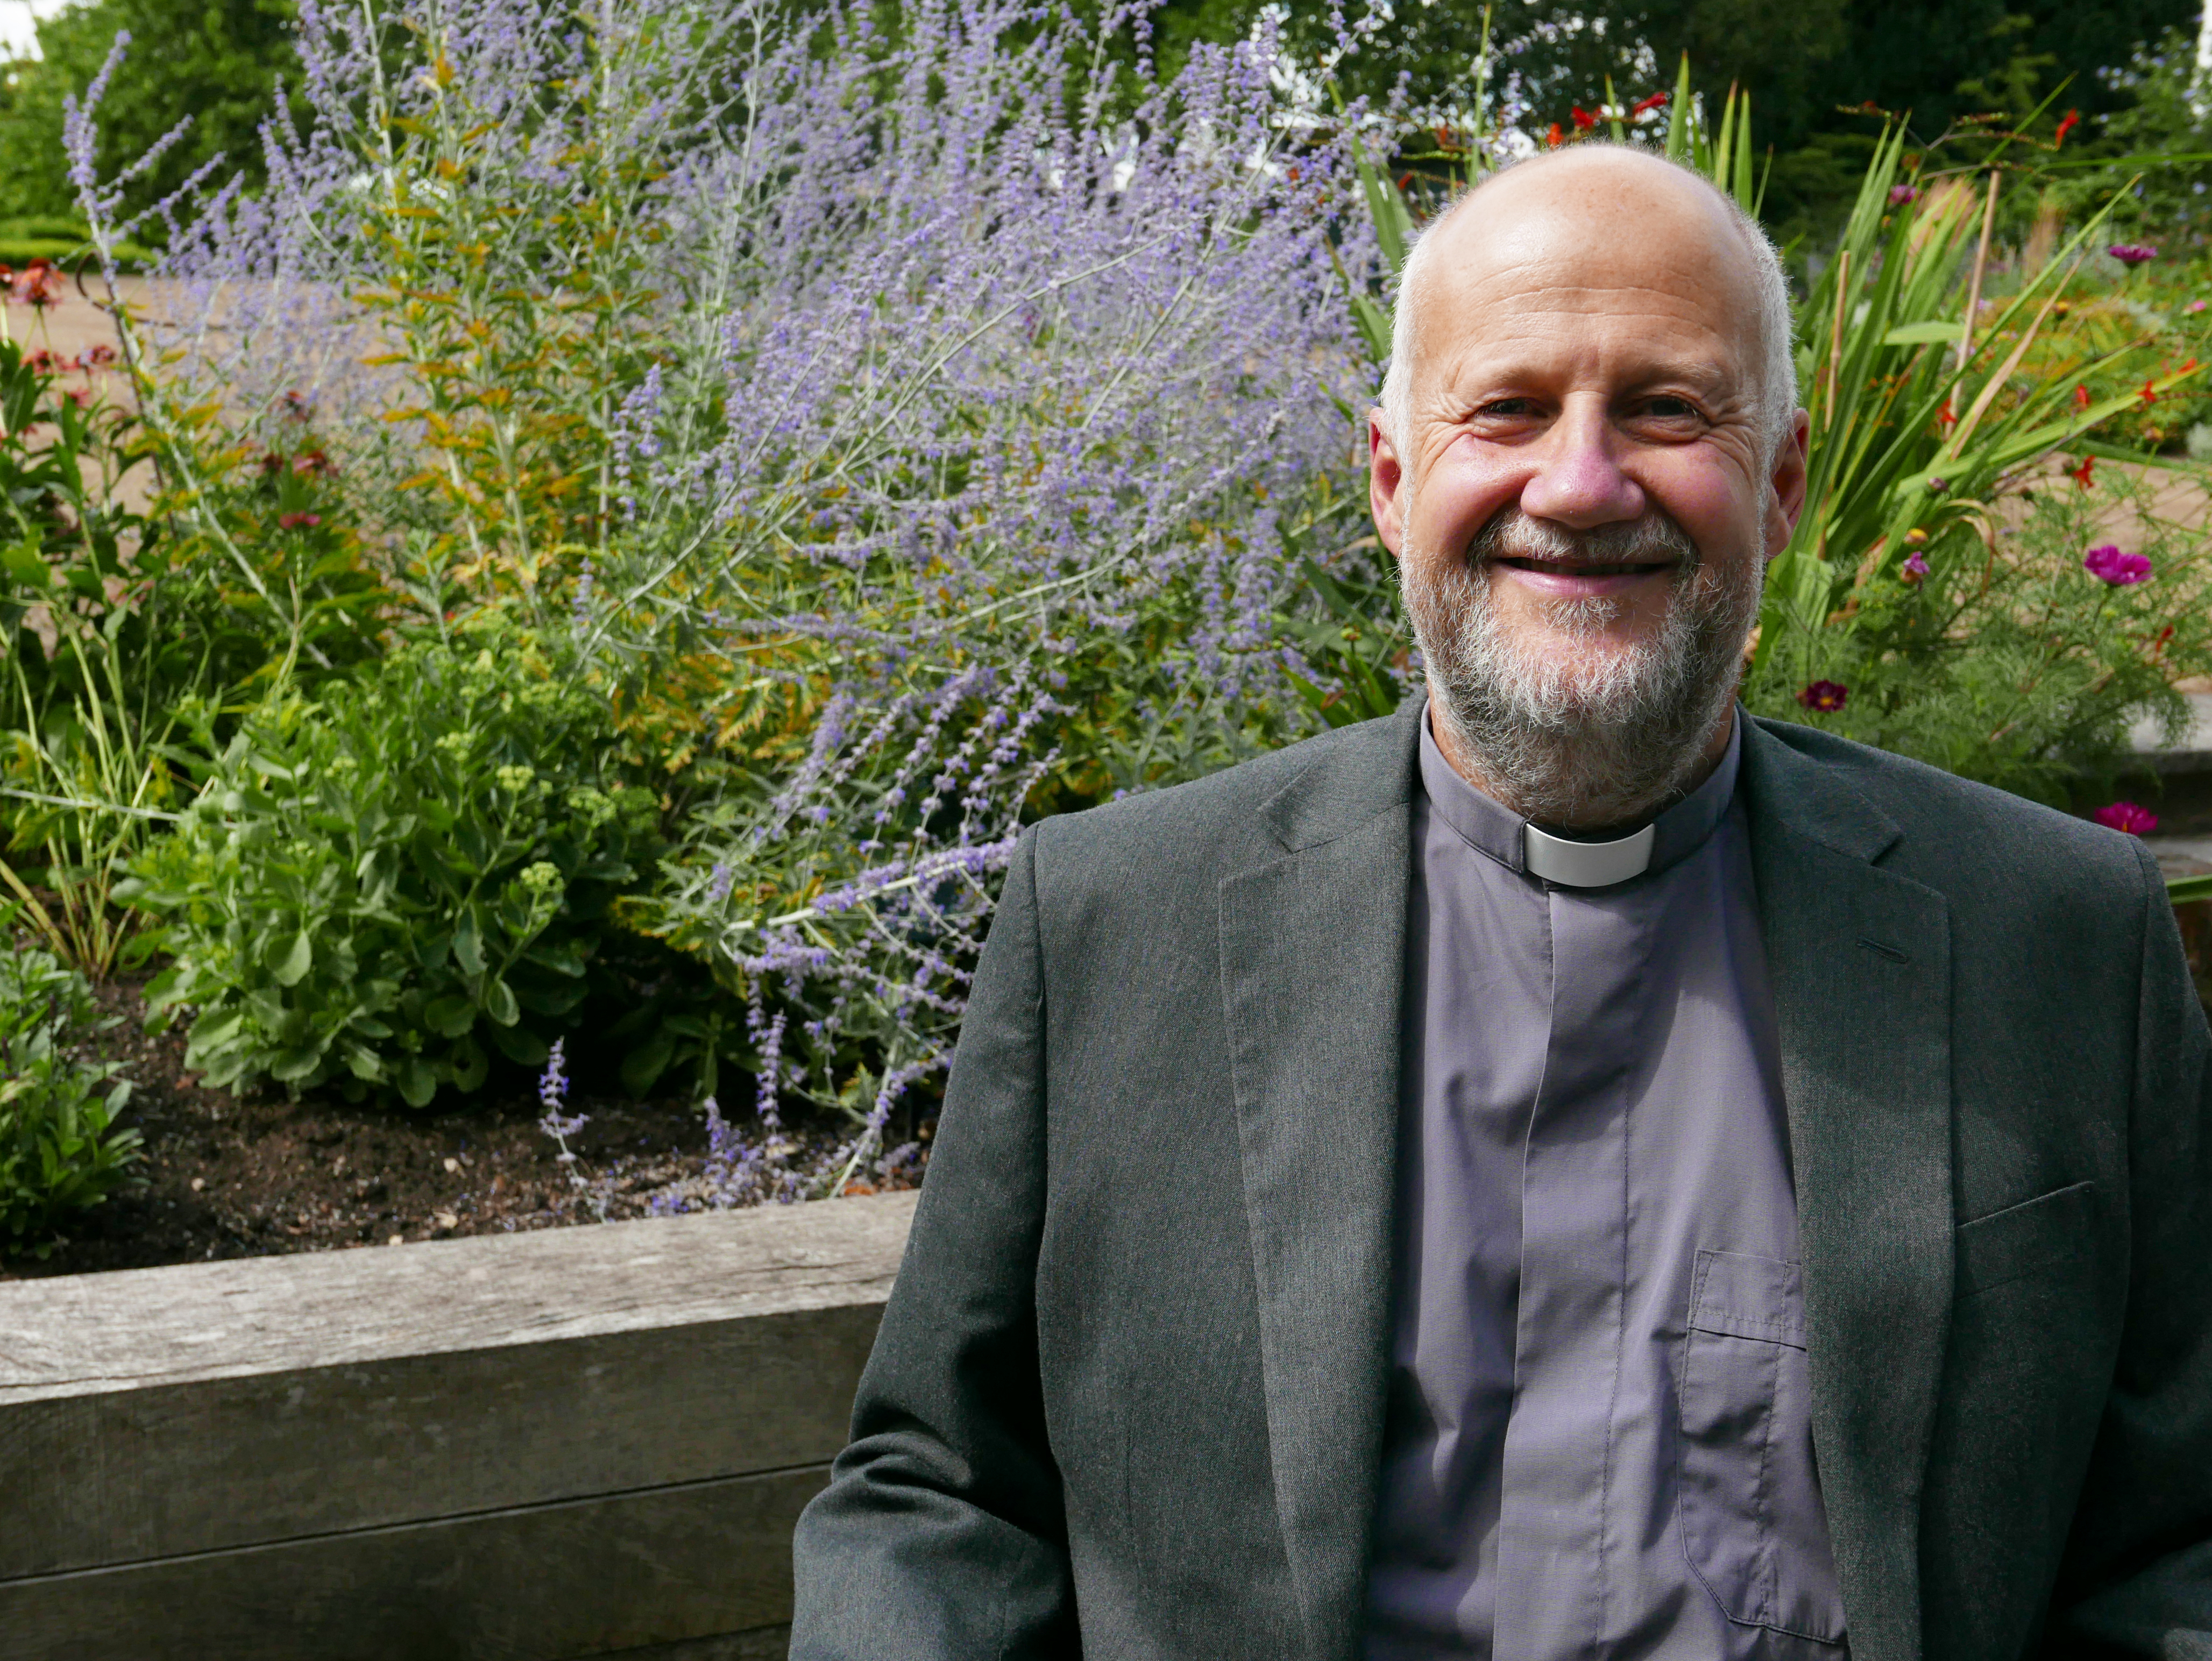 Archdeacon Andy Wooding-Jones